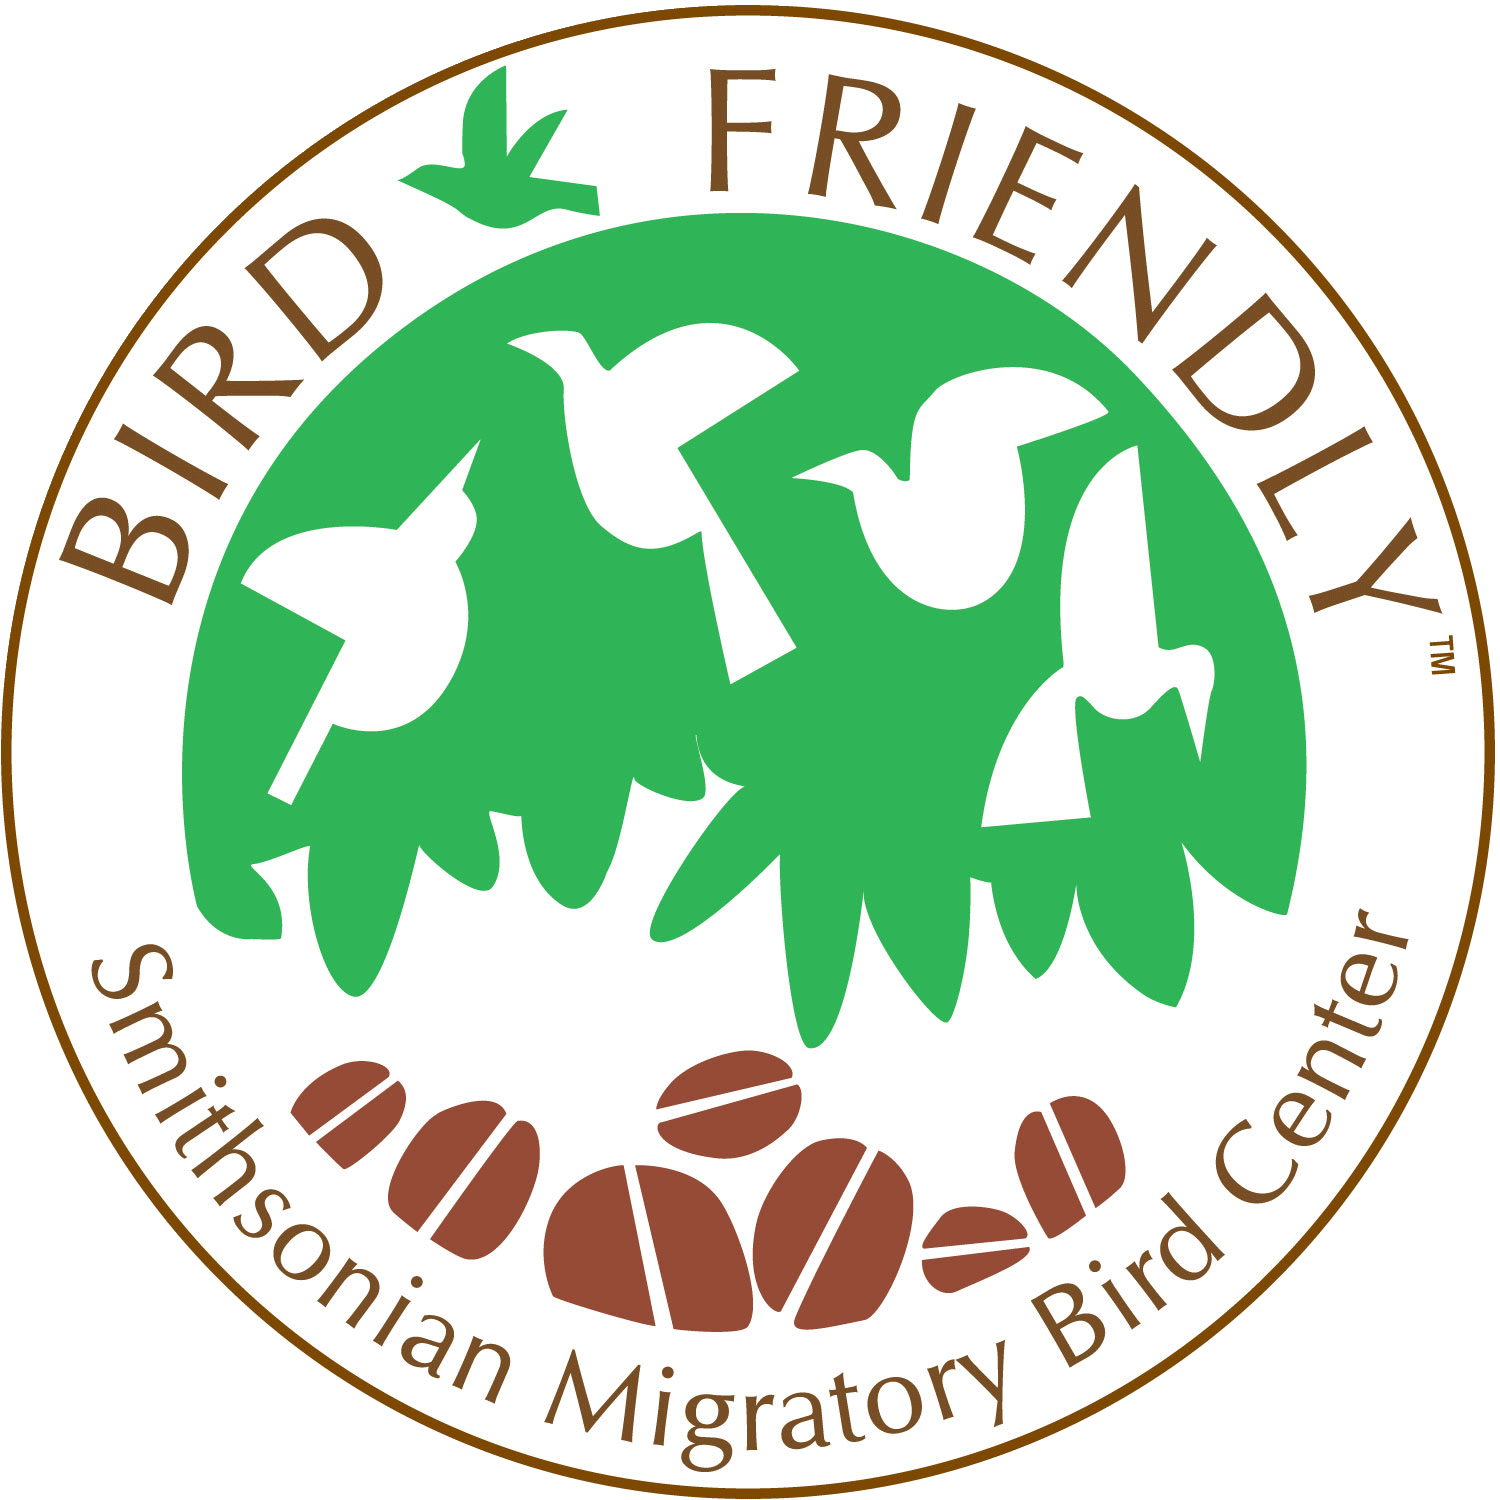 A Logo With Birds And Birds On It